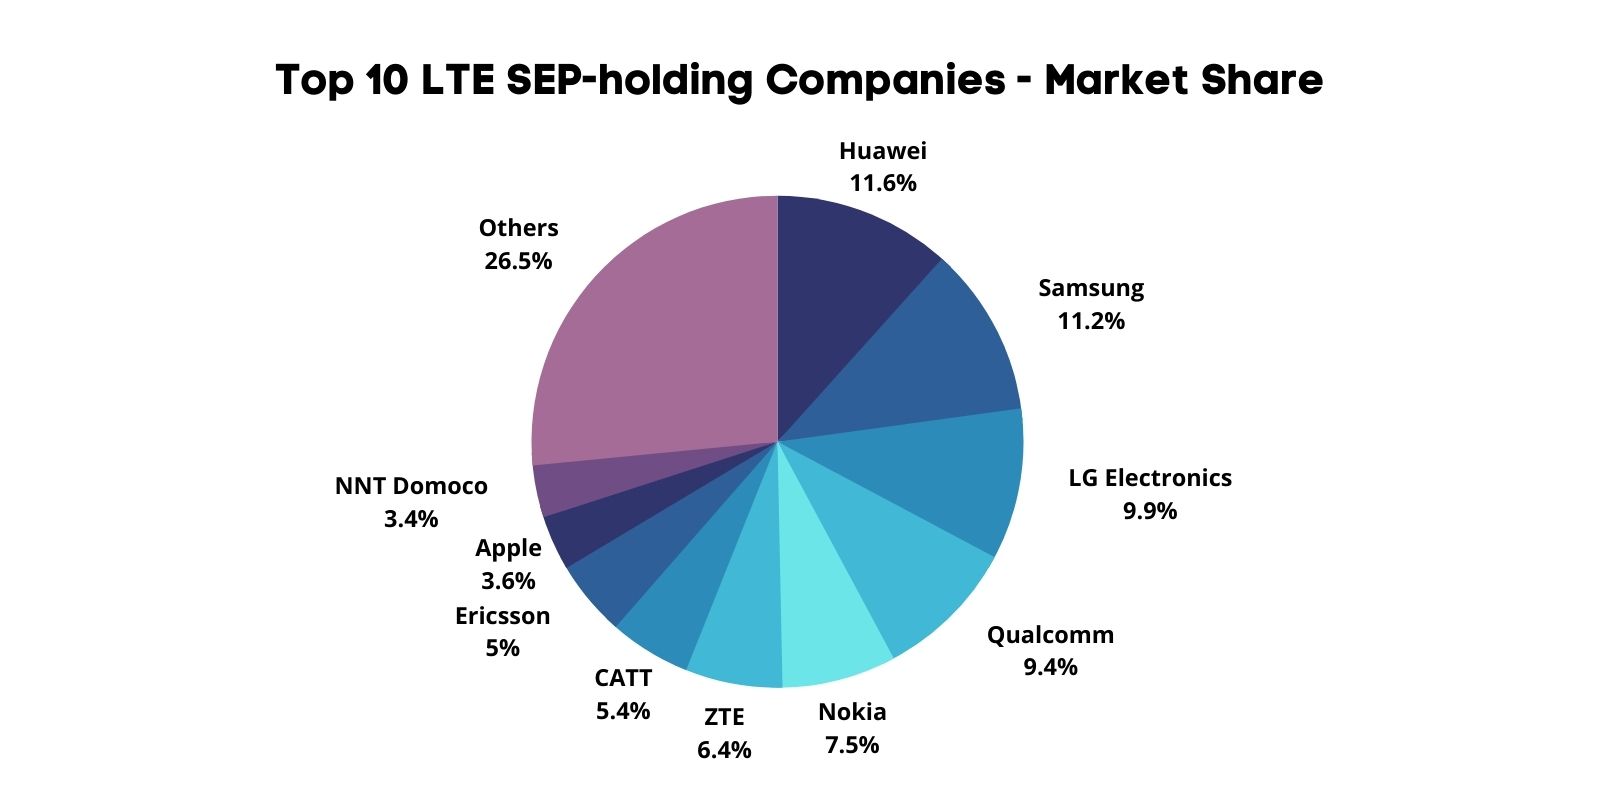 Pie chart indicating market share for the top 10 LTE SEP holding companies